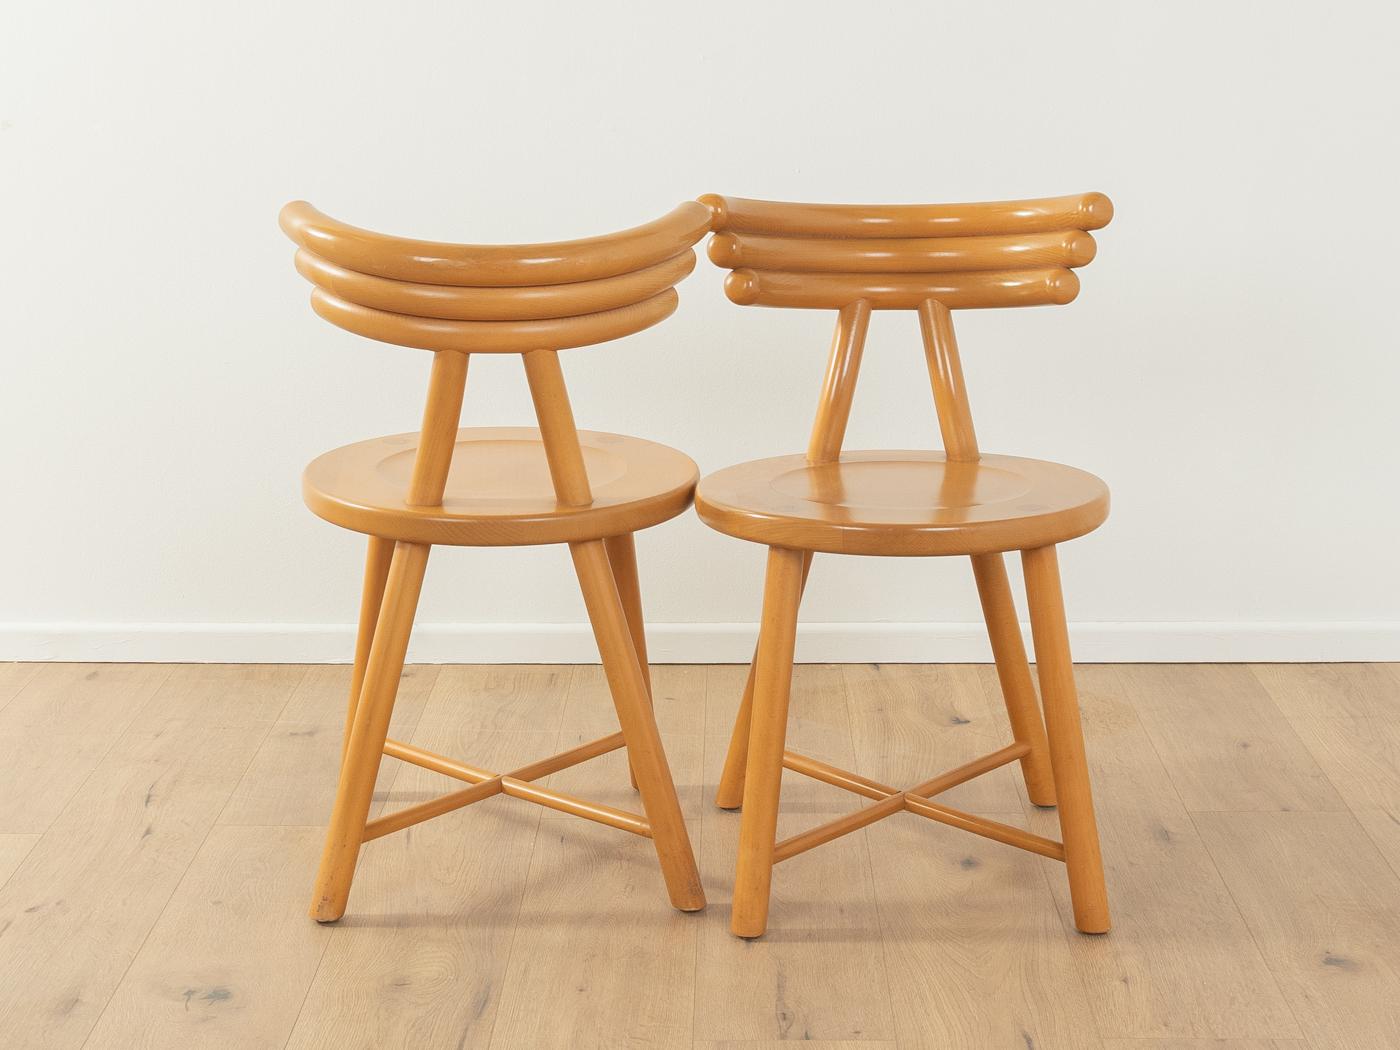 Postmodern Dining chairs, Eka Wohnmöbel In Good Condition For Sale In Neuss, NW